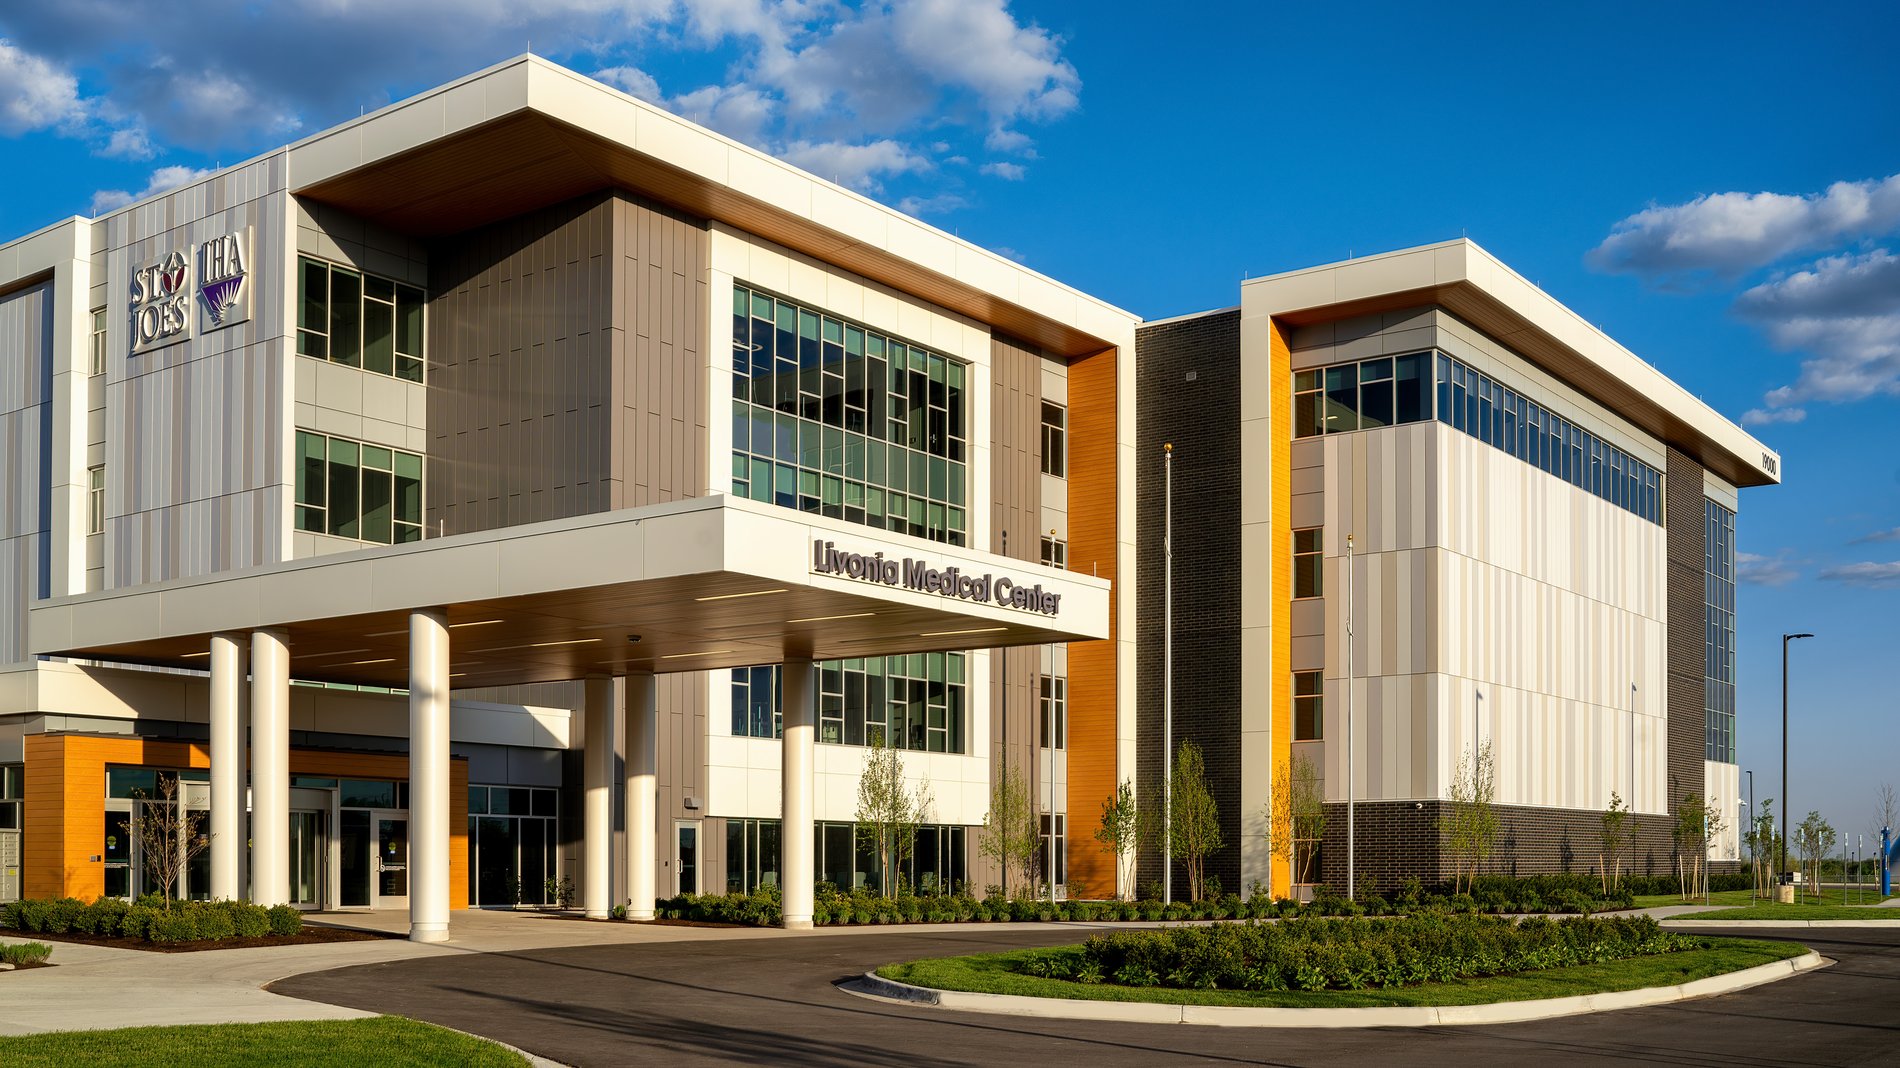 Trinity Health IHA Medical Group, Urology - Schoolcraft Campus is located in the Livonia Medical Center.